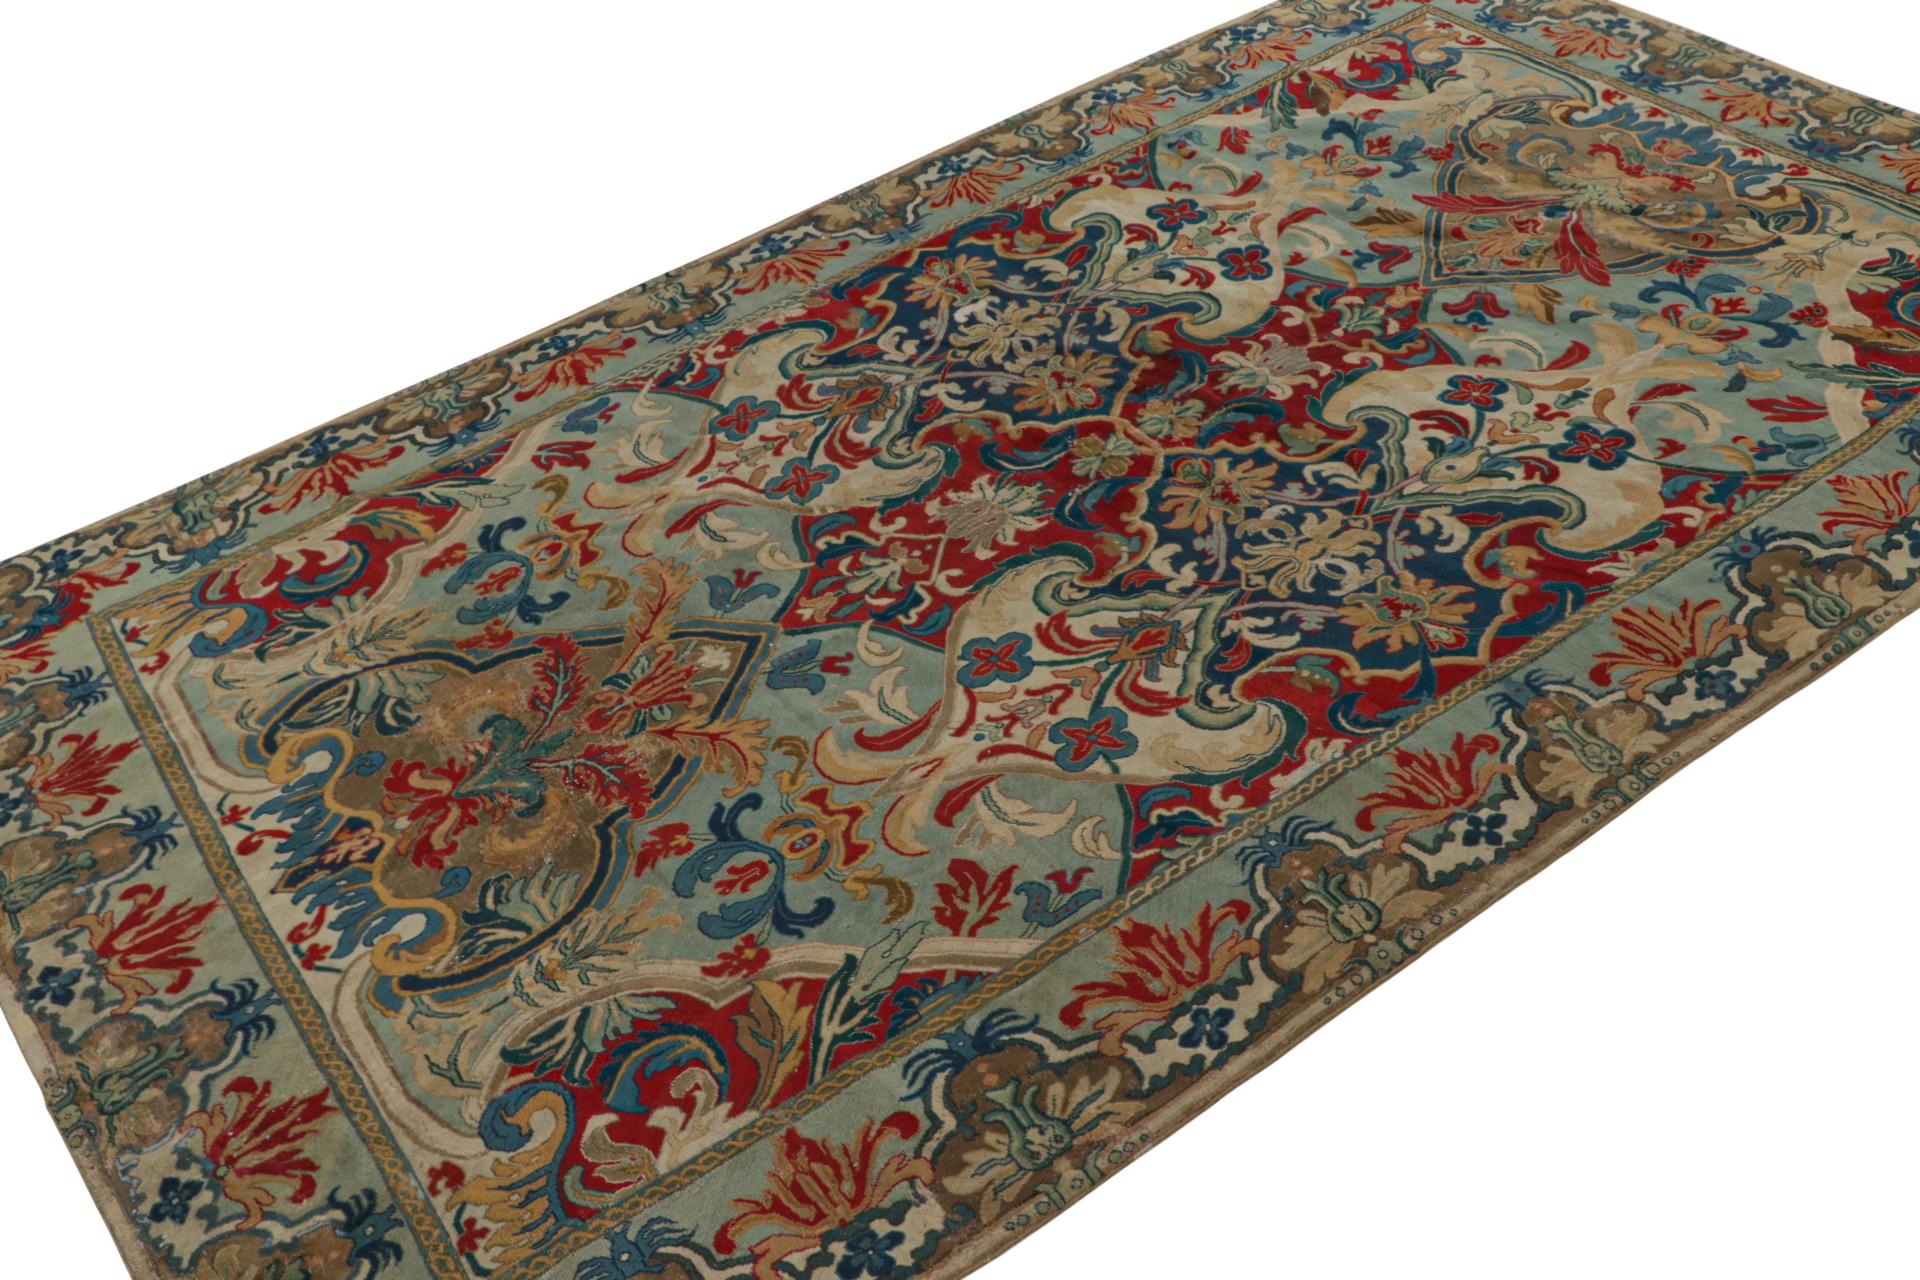 Handmade in wool circa 1850-1860, this 5x9 antique French needlepoint rug is a particularly rare addition to our European rug collection. Its design features intricate medallions and florals in an all over pattern with notable blue, red and